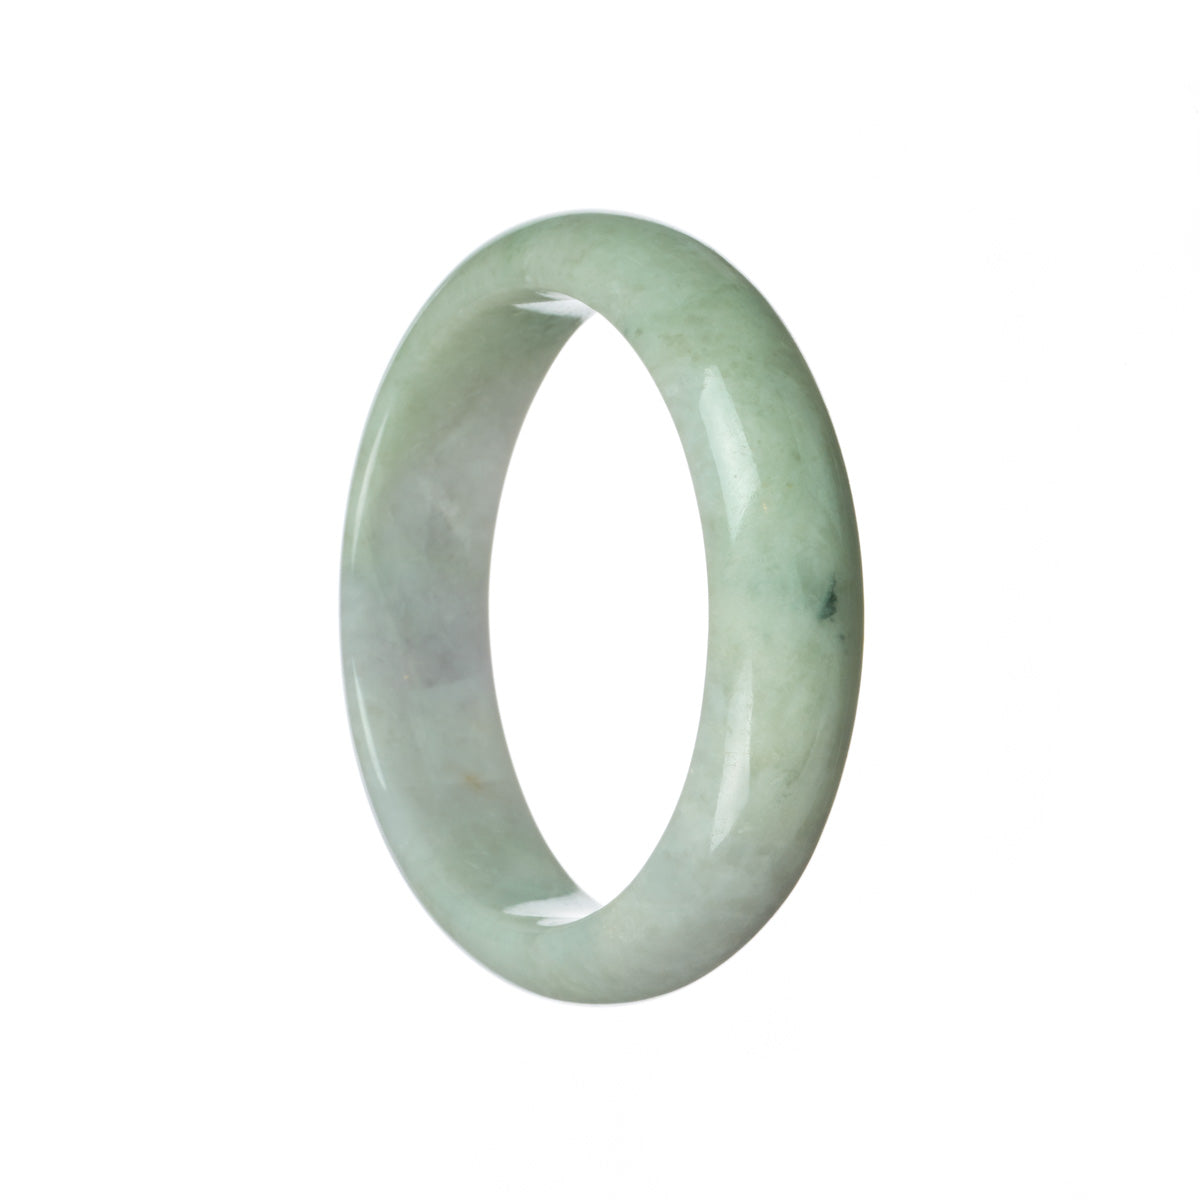 An elegant, certified Grade A pale green bangle made from lavender Burma Jade. This 59mm half moon-shaped accessory from MAYS GEMS is a stunning piece of jewelry.